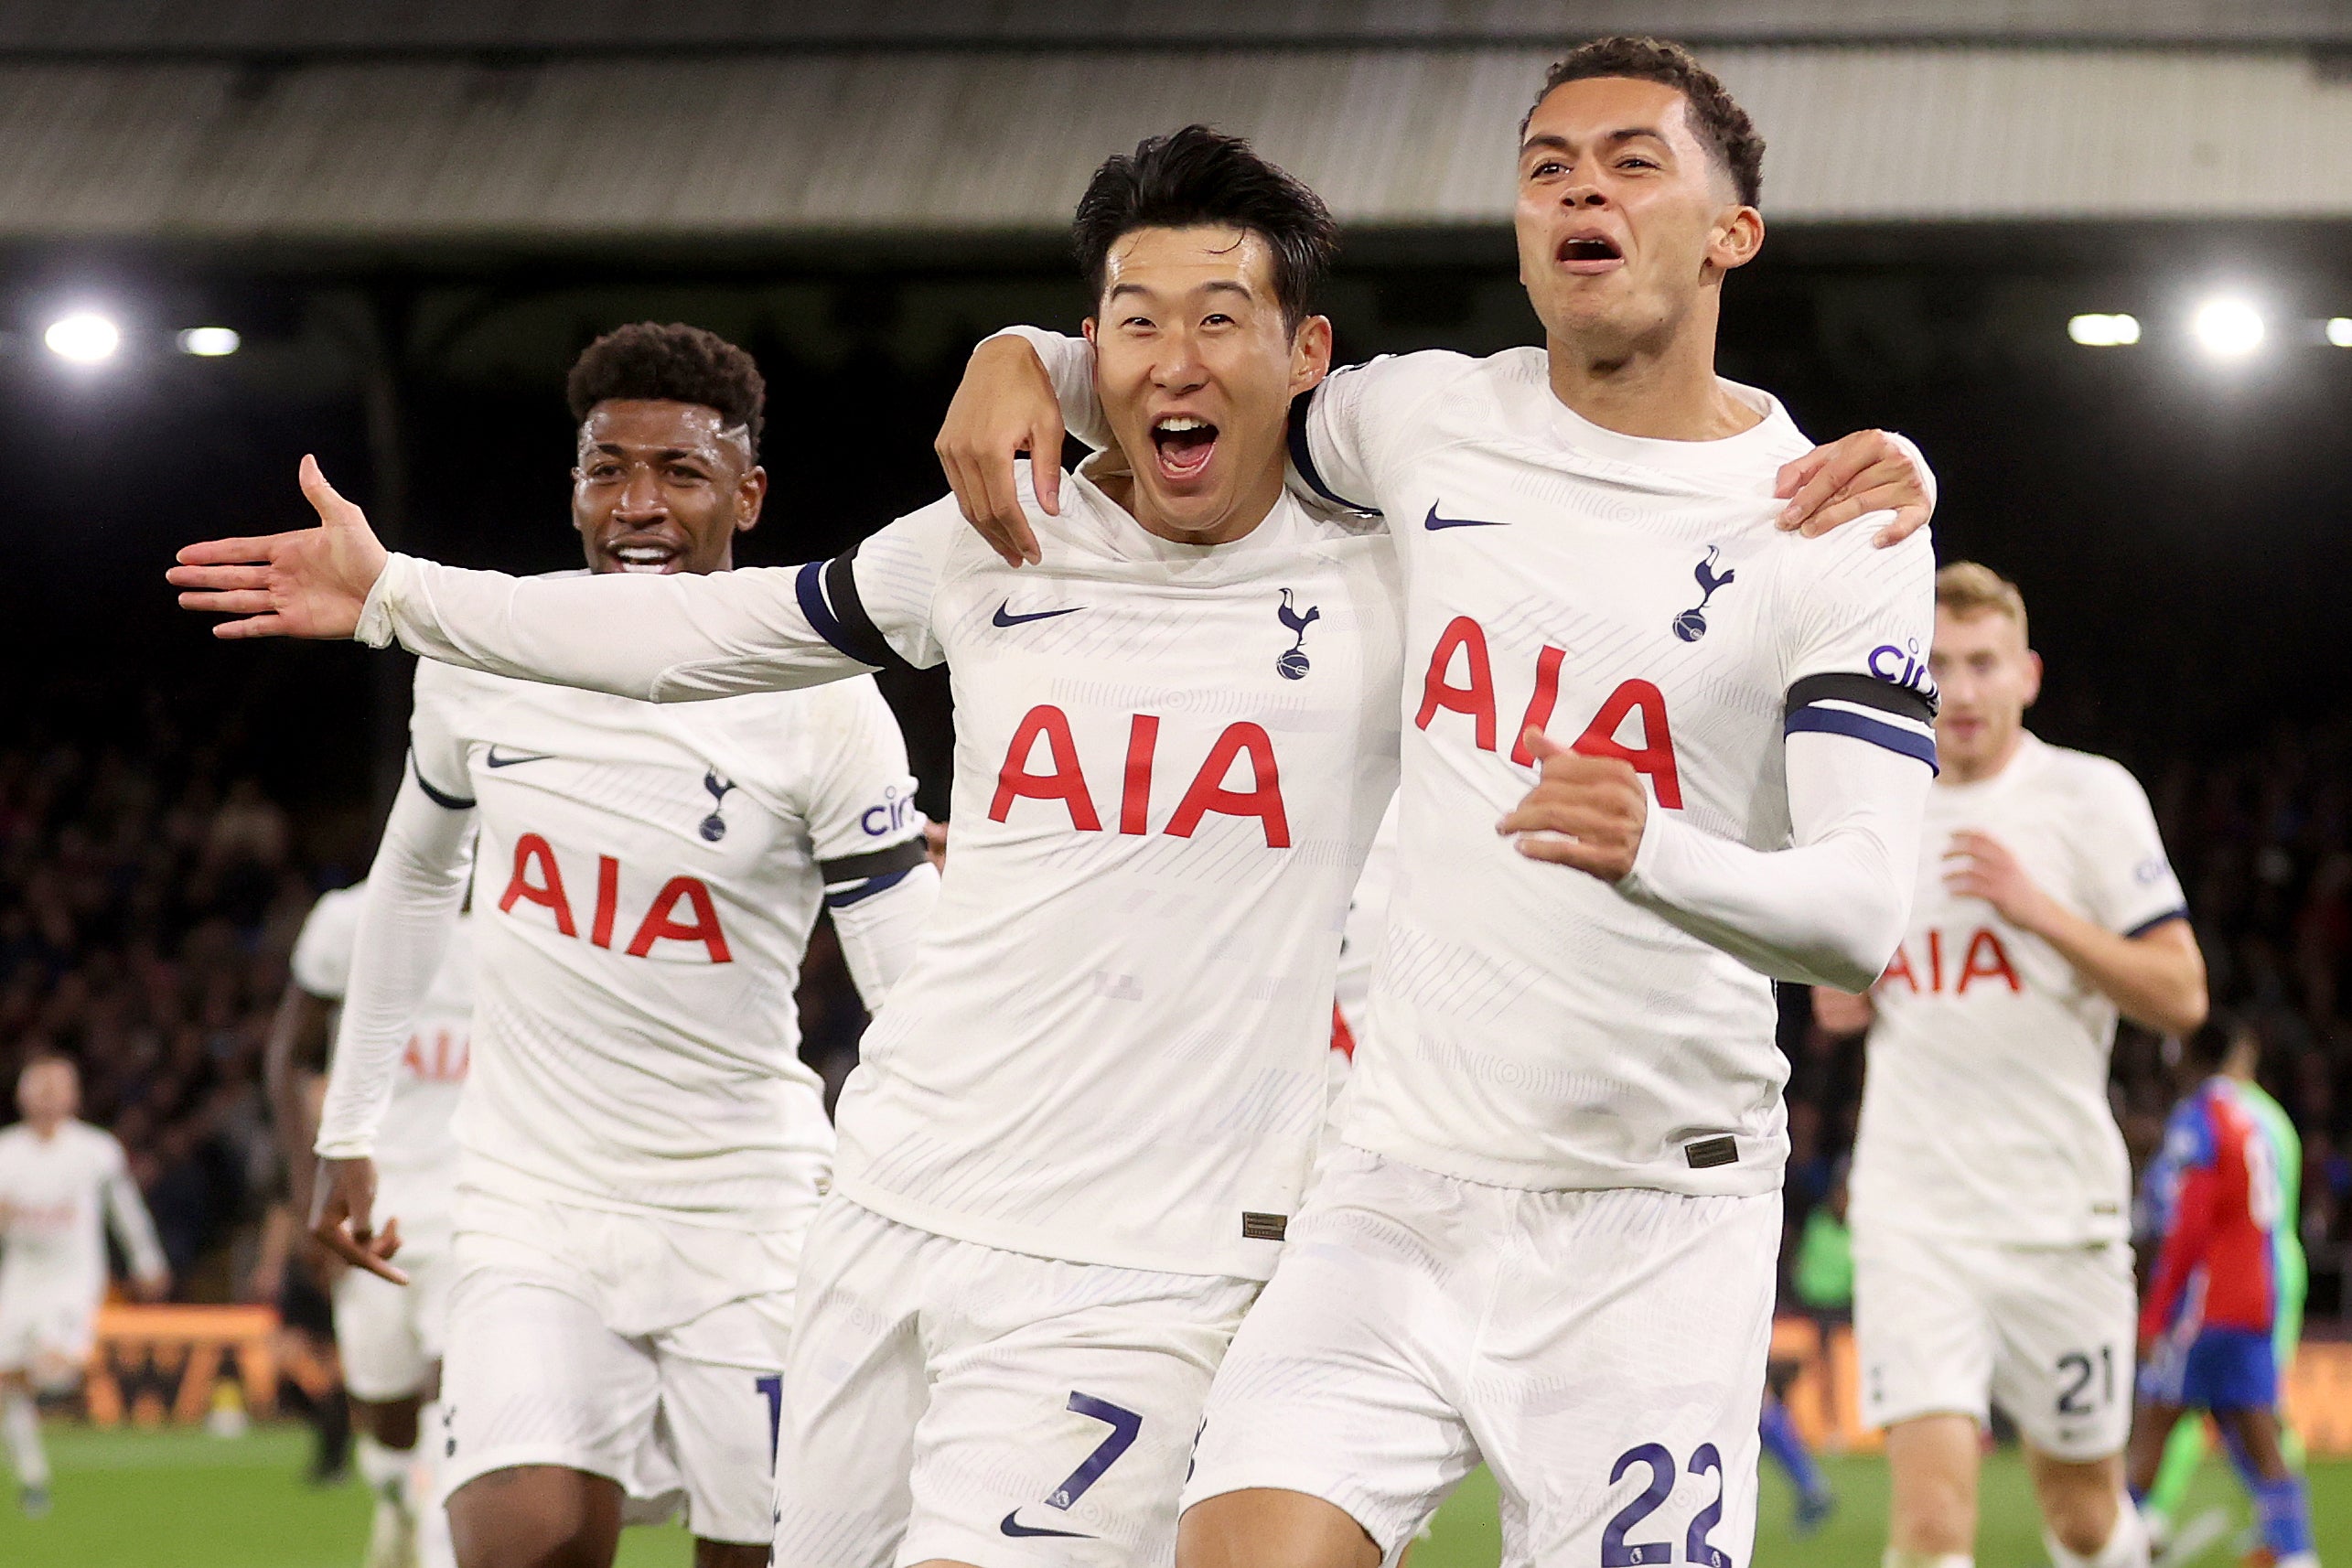 Tottenham overcome a 'different challenge' on way to extending Premier League lead | The Independent